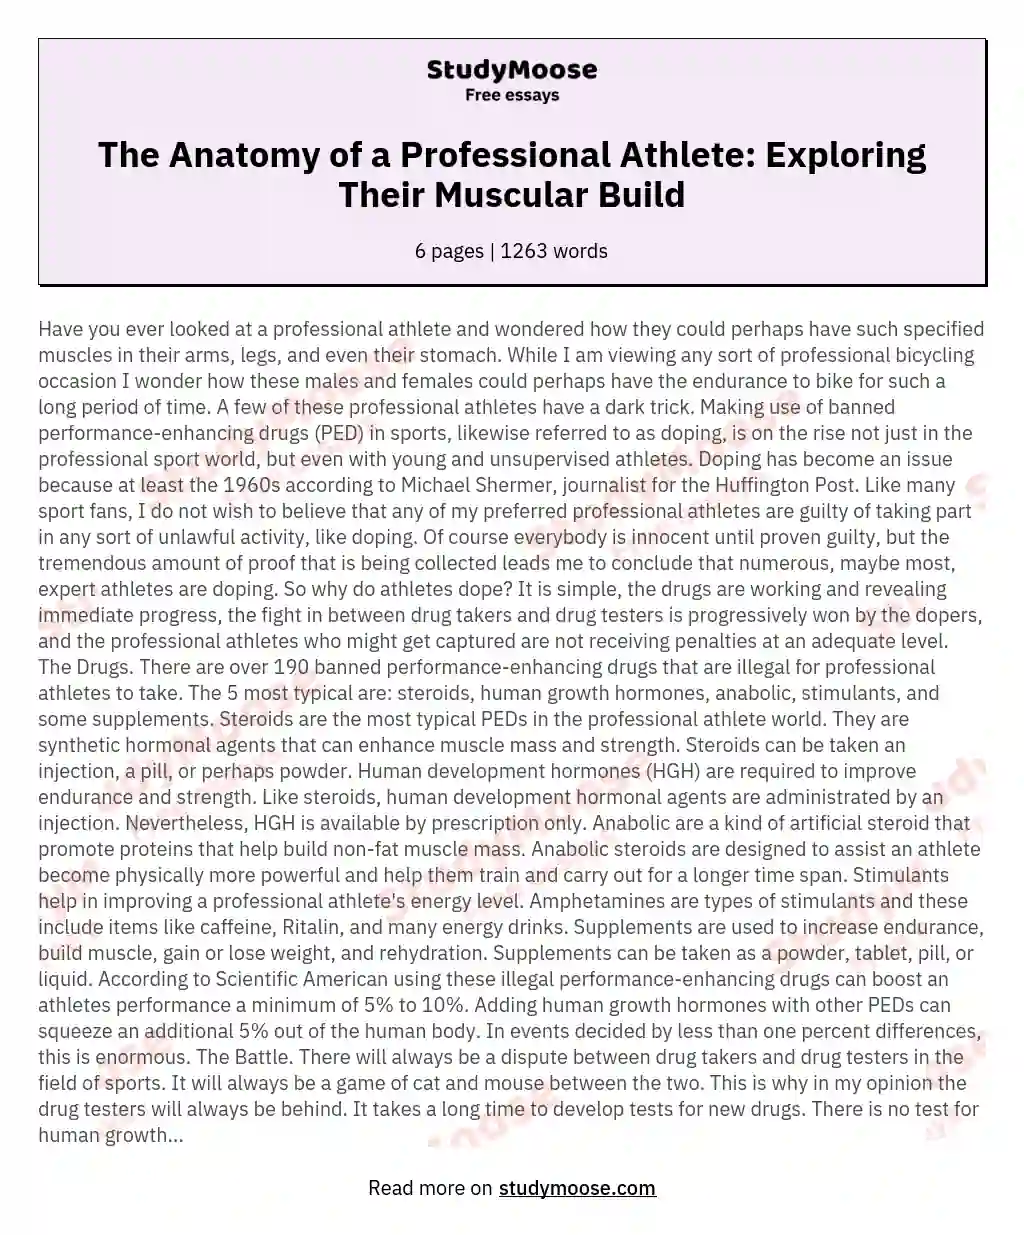 The Anatomy of a Professional Athlete: Exploring Their Muscular Build essay